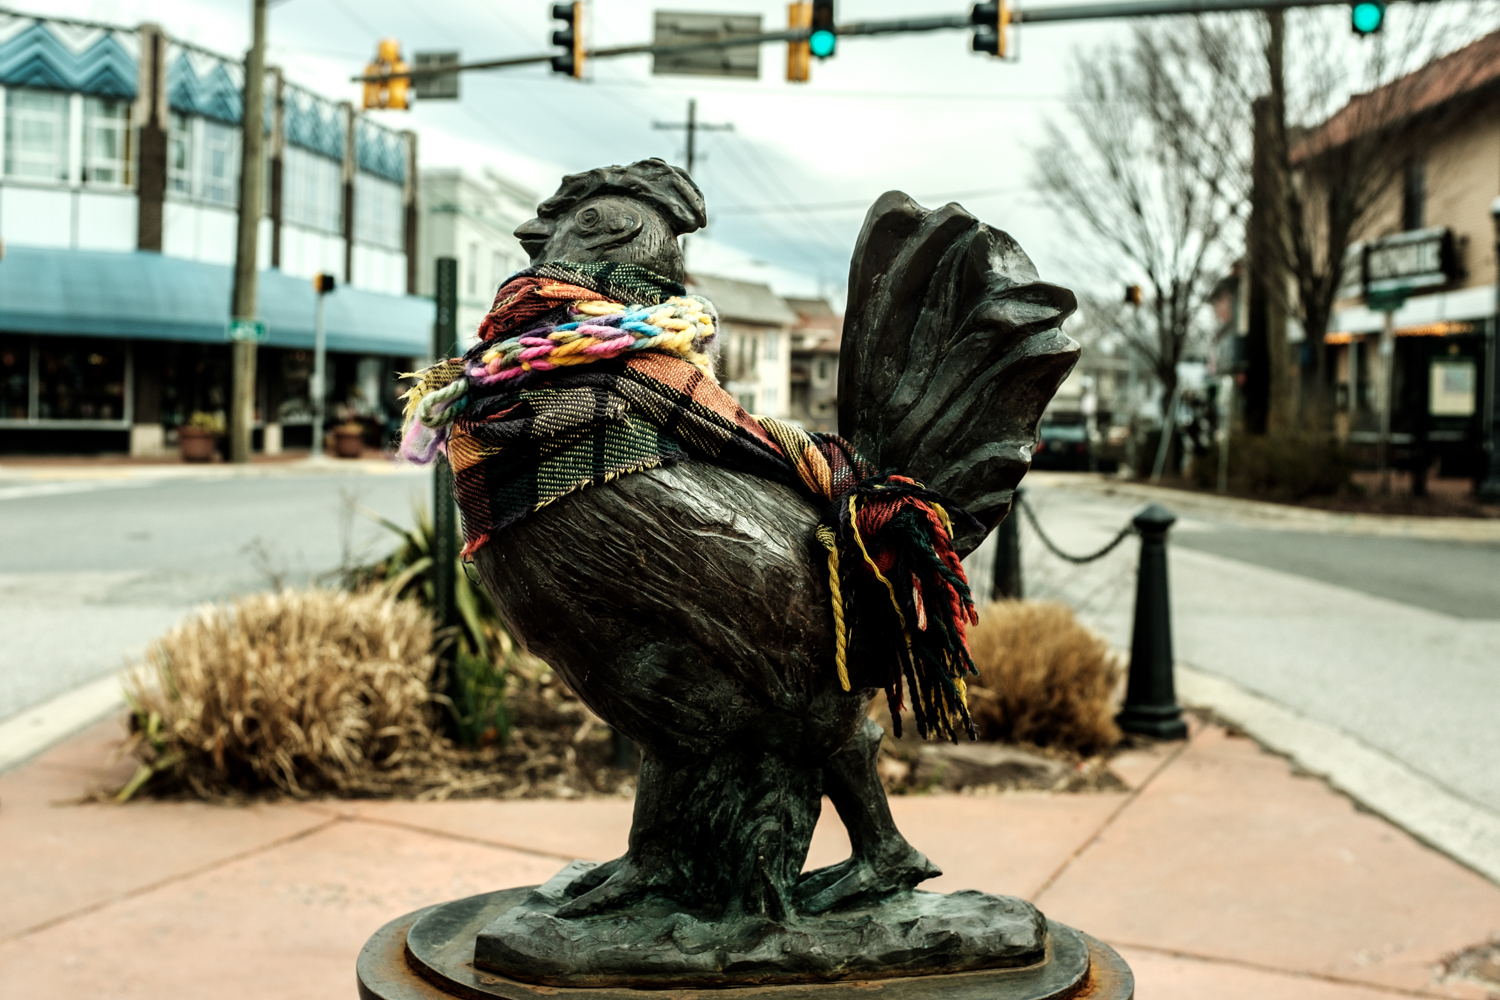 Statue of Roscoe the Rooster, Takoma Park